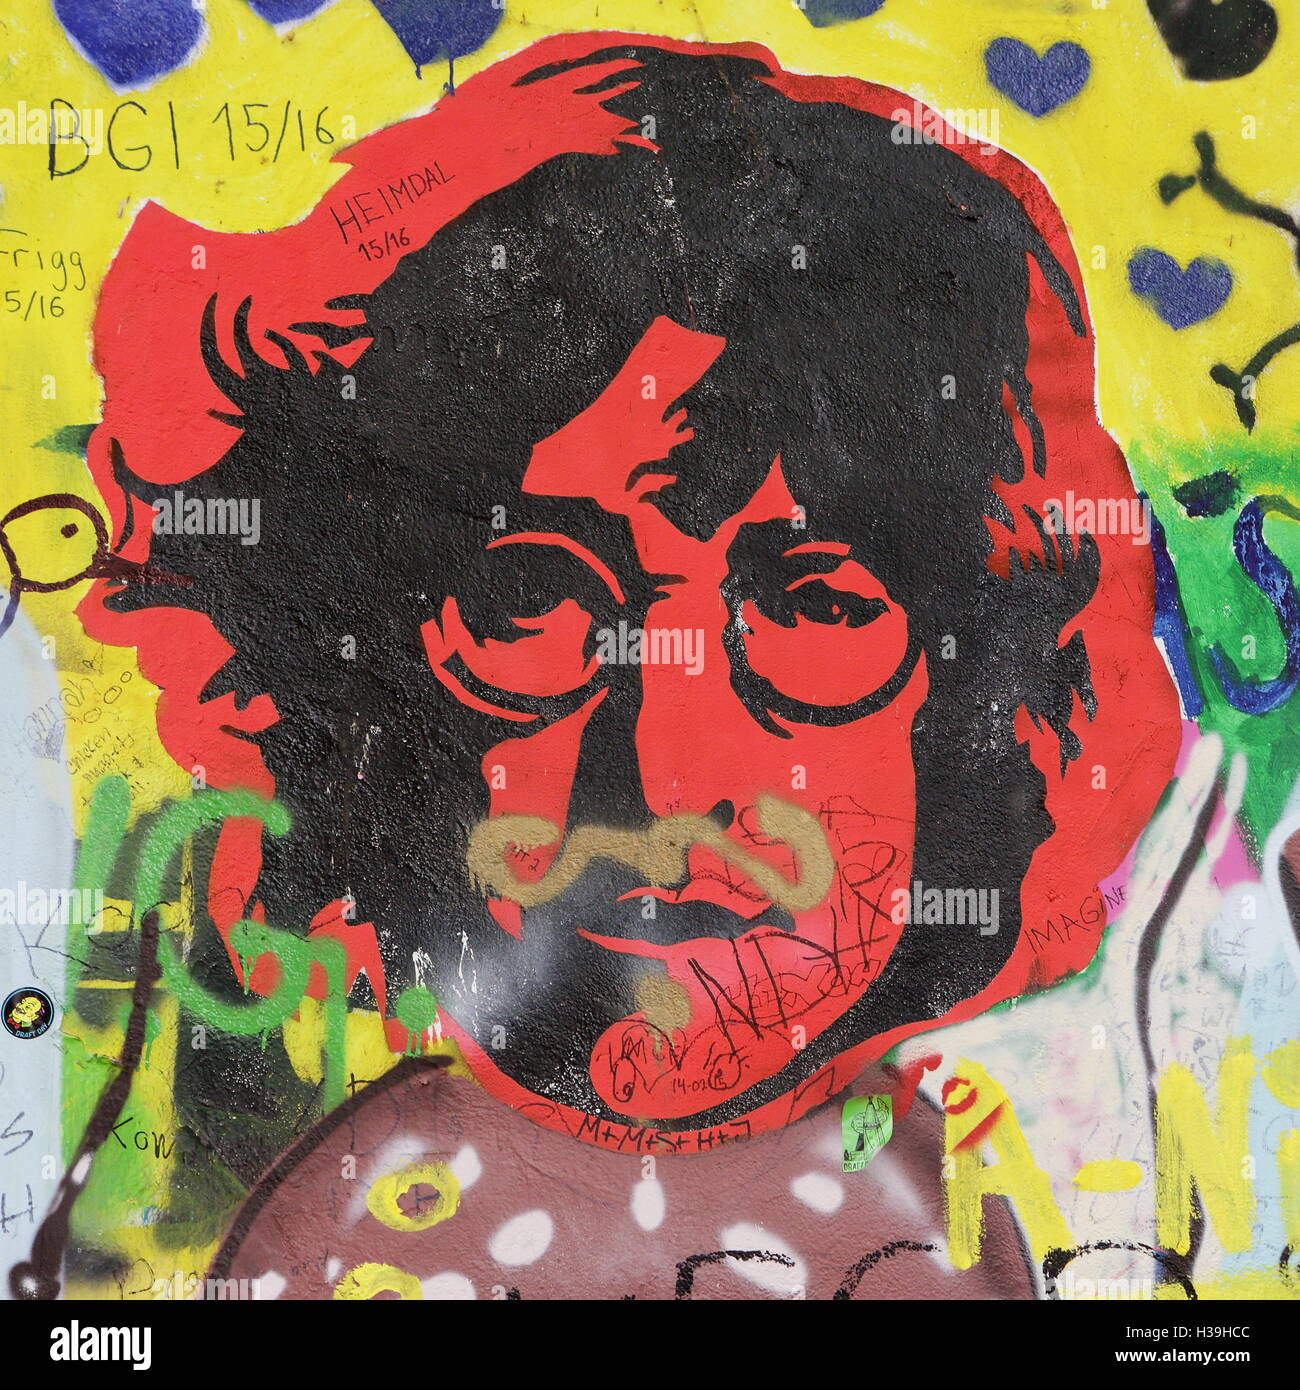 PRAGUE, CZECH REPUBLIC - JANUARY 04, 2016: The Lennon Wall since the 1980s is filled with John Lennon-inspired graffiti Stock Photo